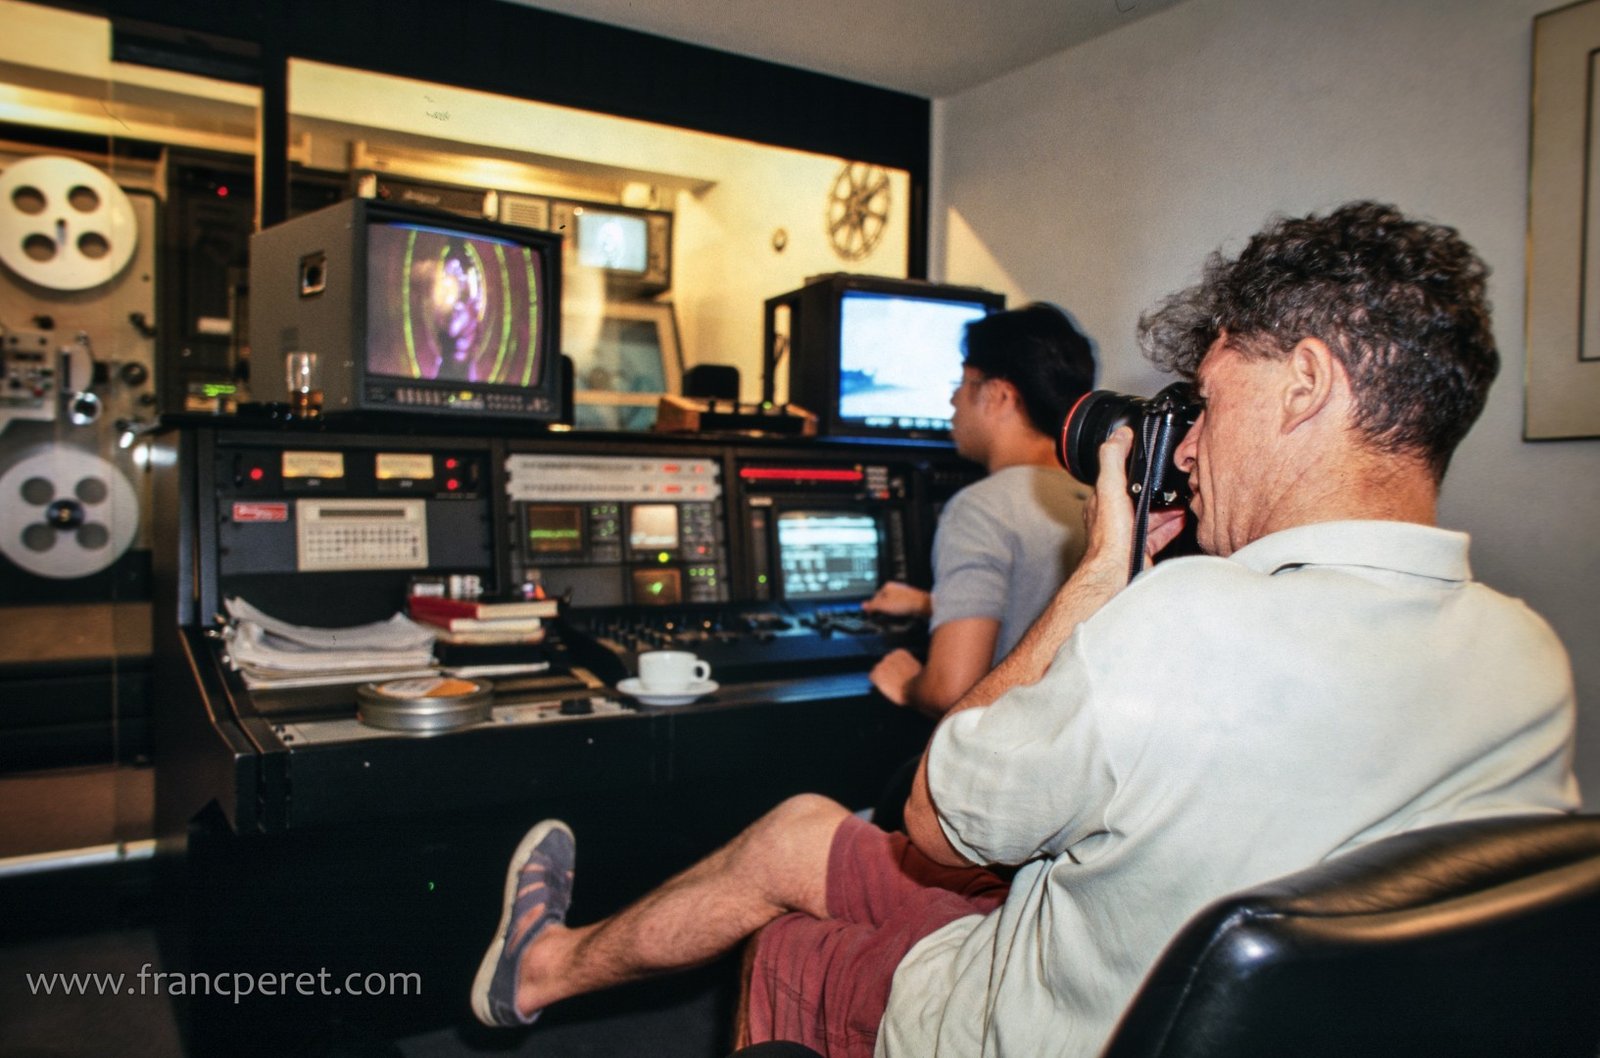 Christopher Doyle shooting still picture while monitoring the editing of a TV commercial.